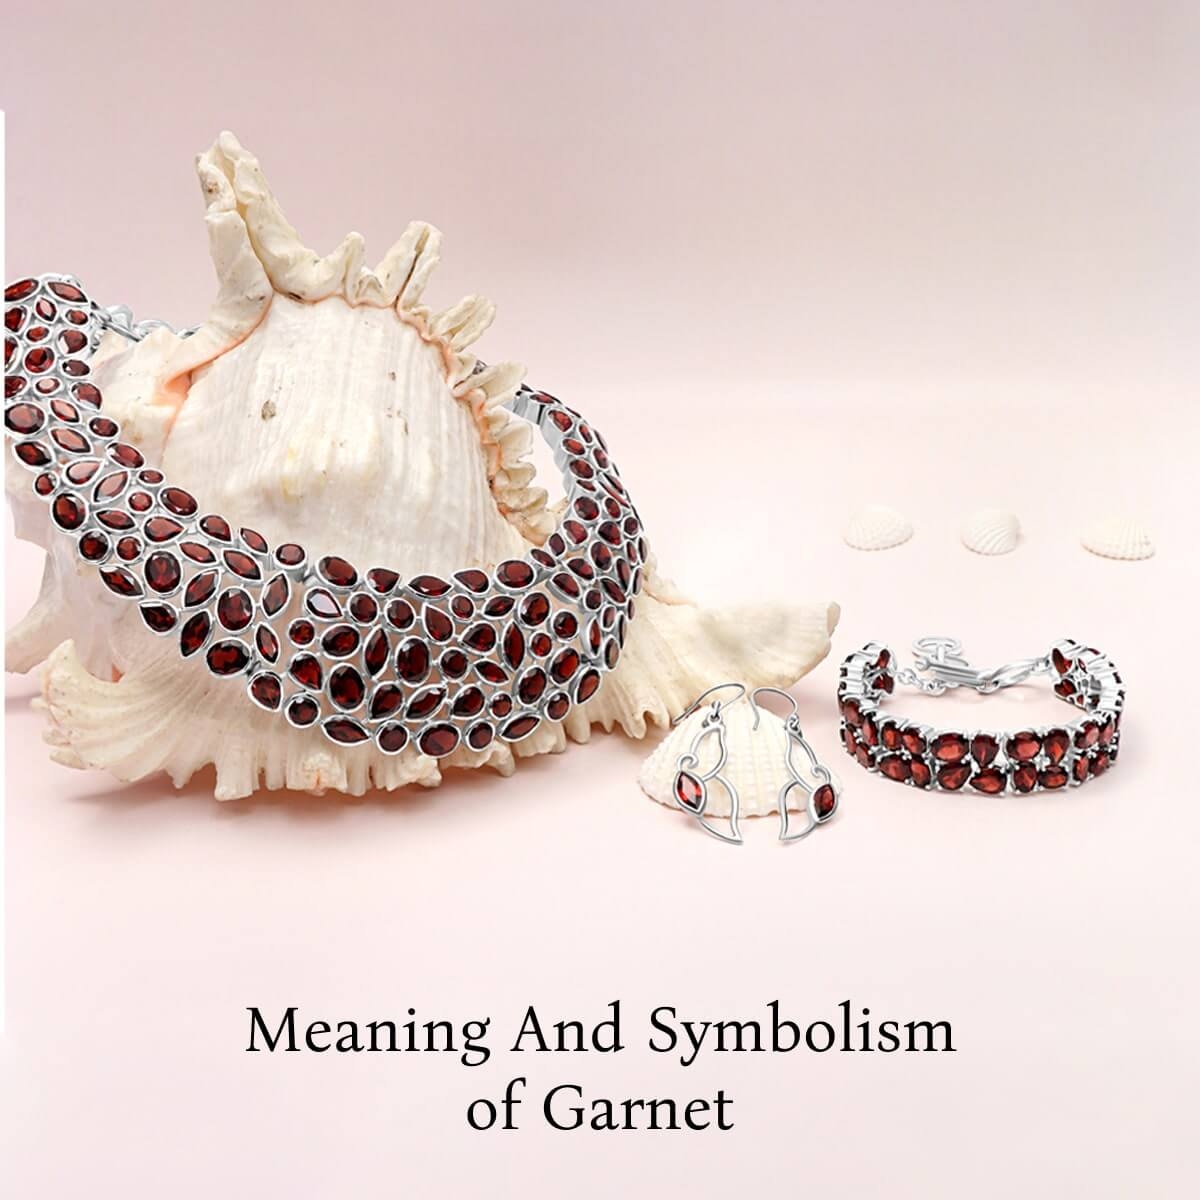 Garnet Meaning and Symbolism